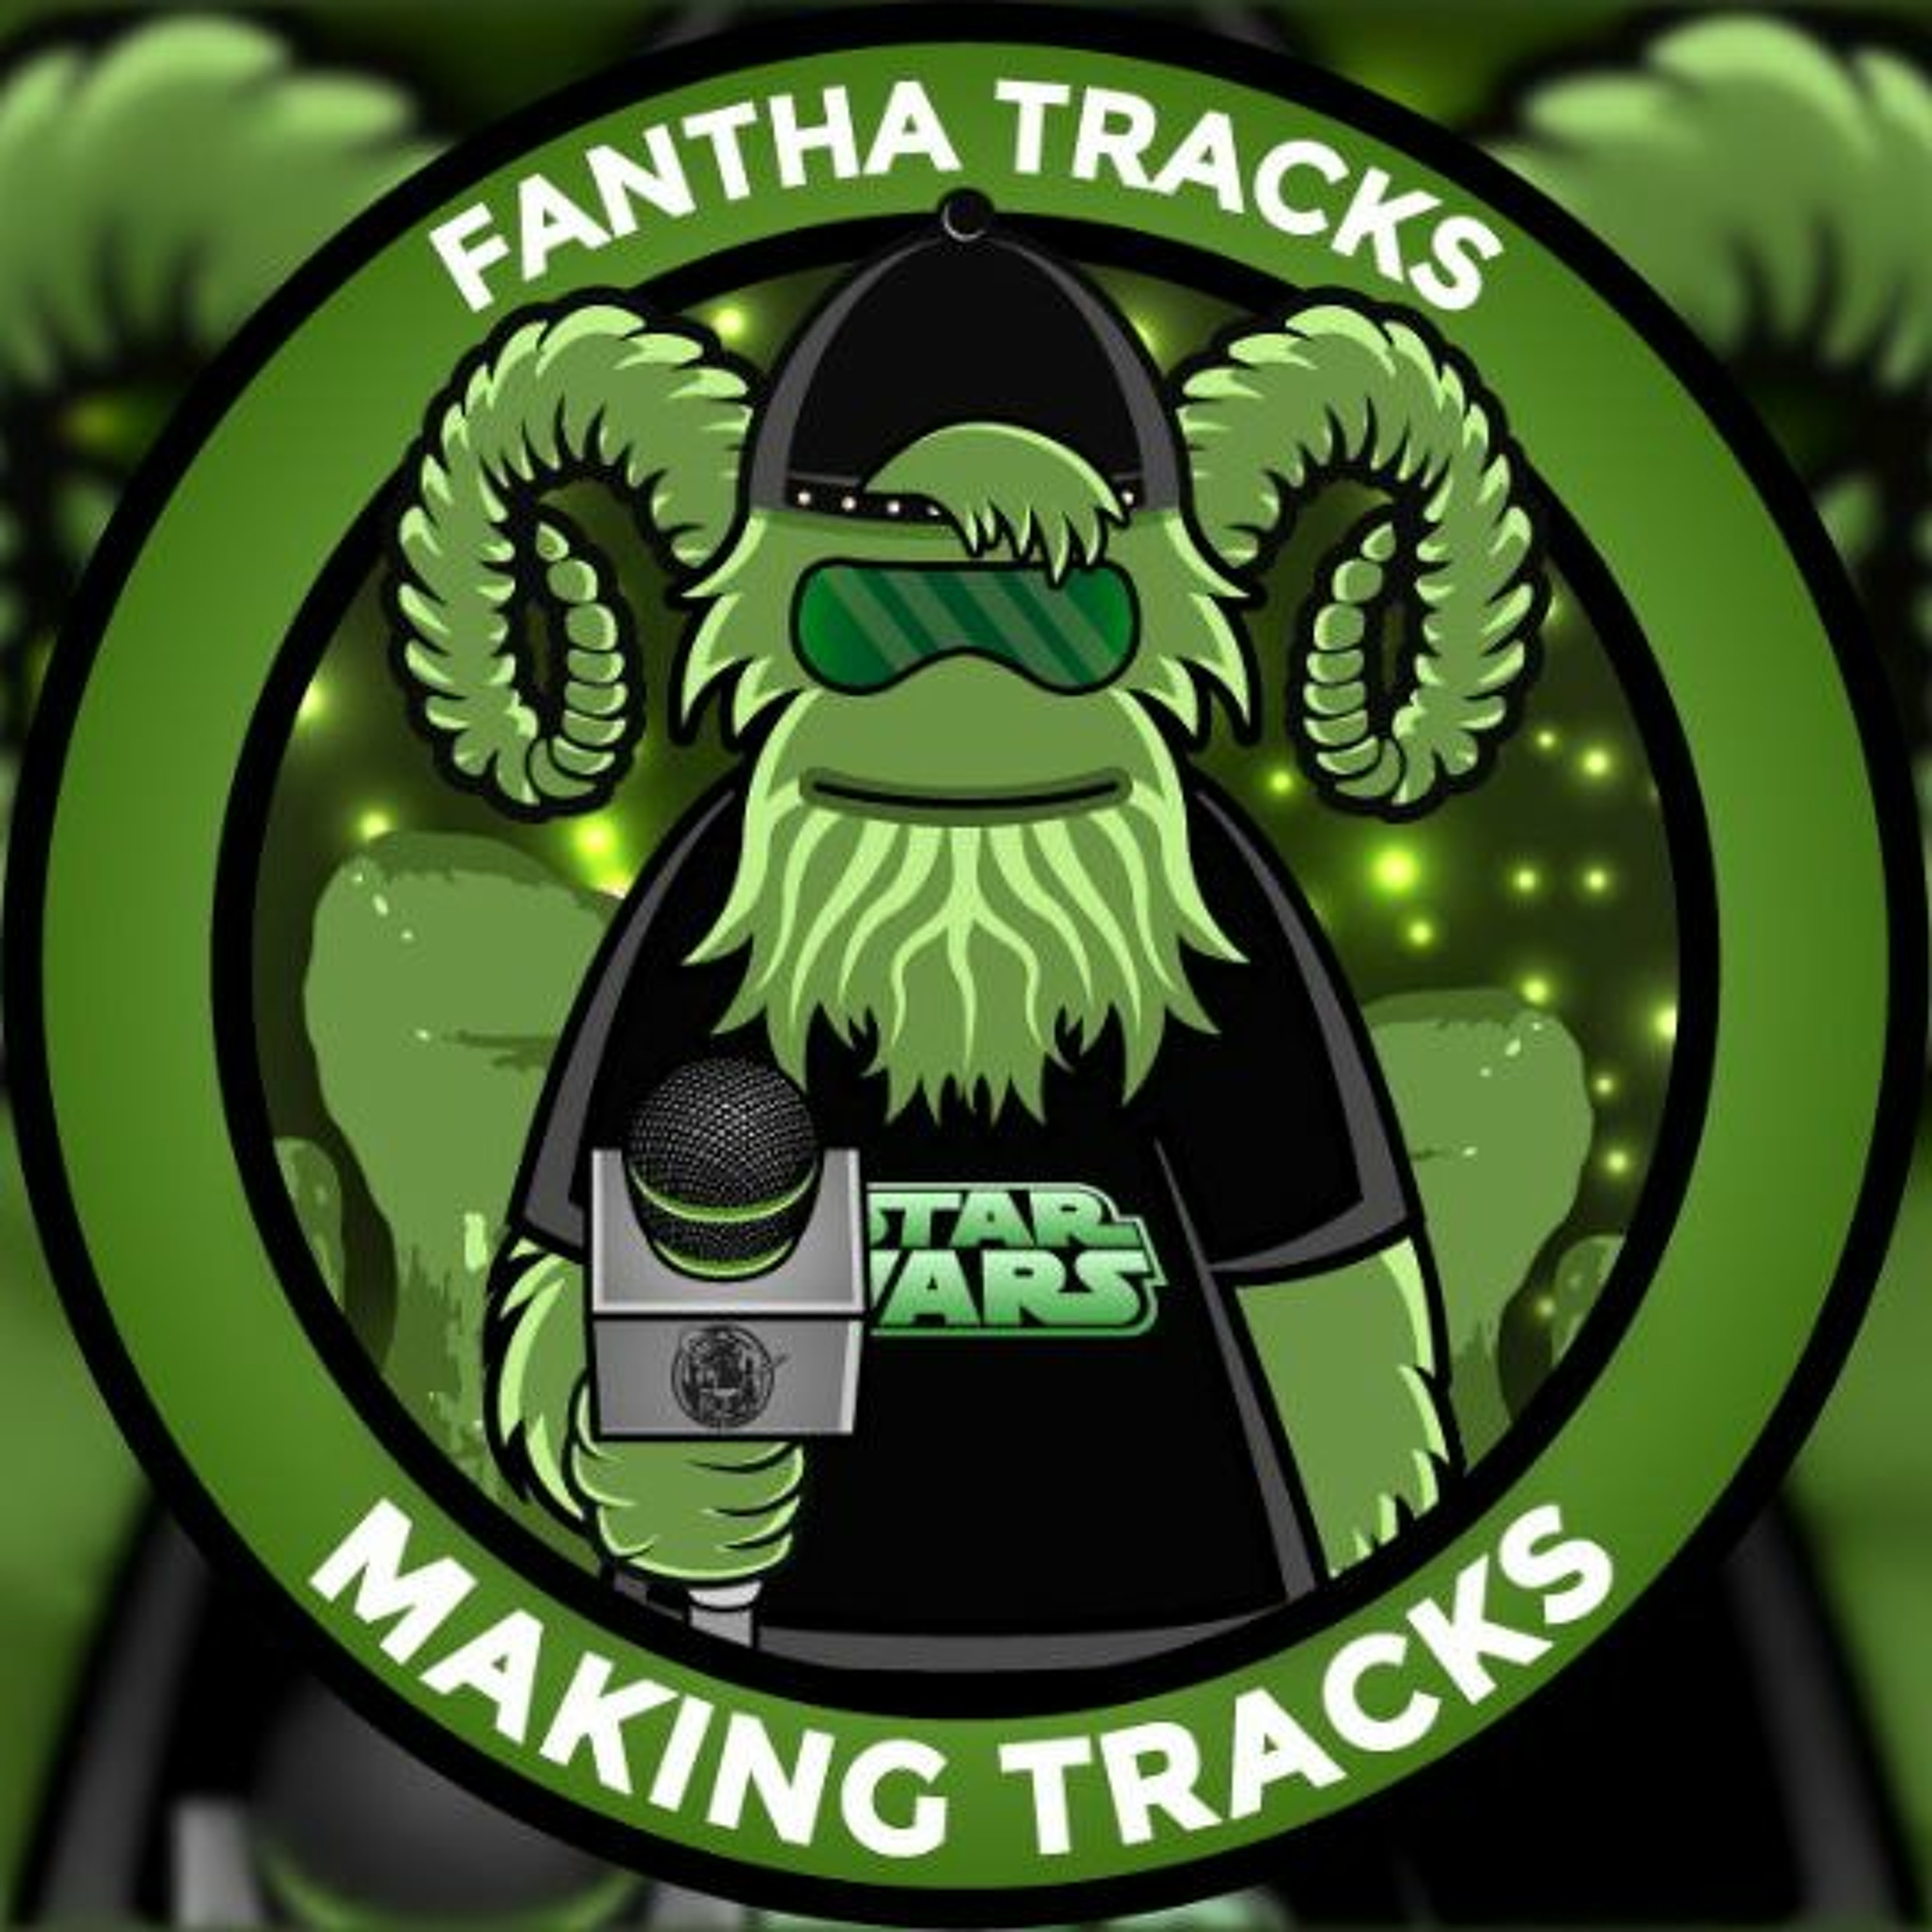 Making Tracks Episode 143: WTF (What The Force!): With guest Matt Denton